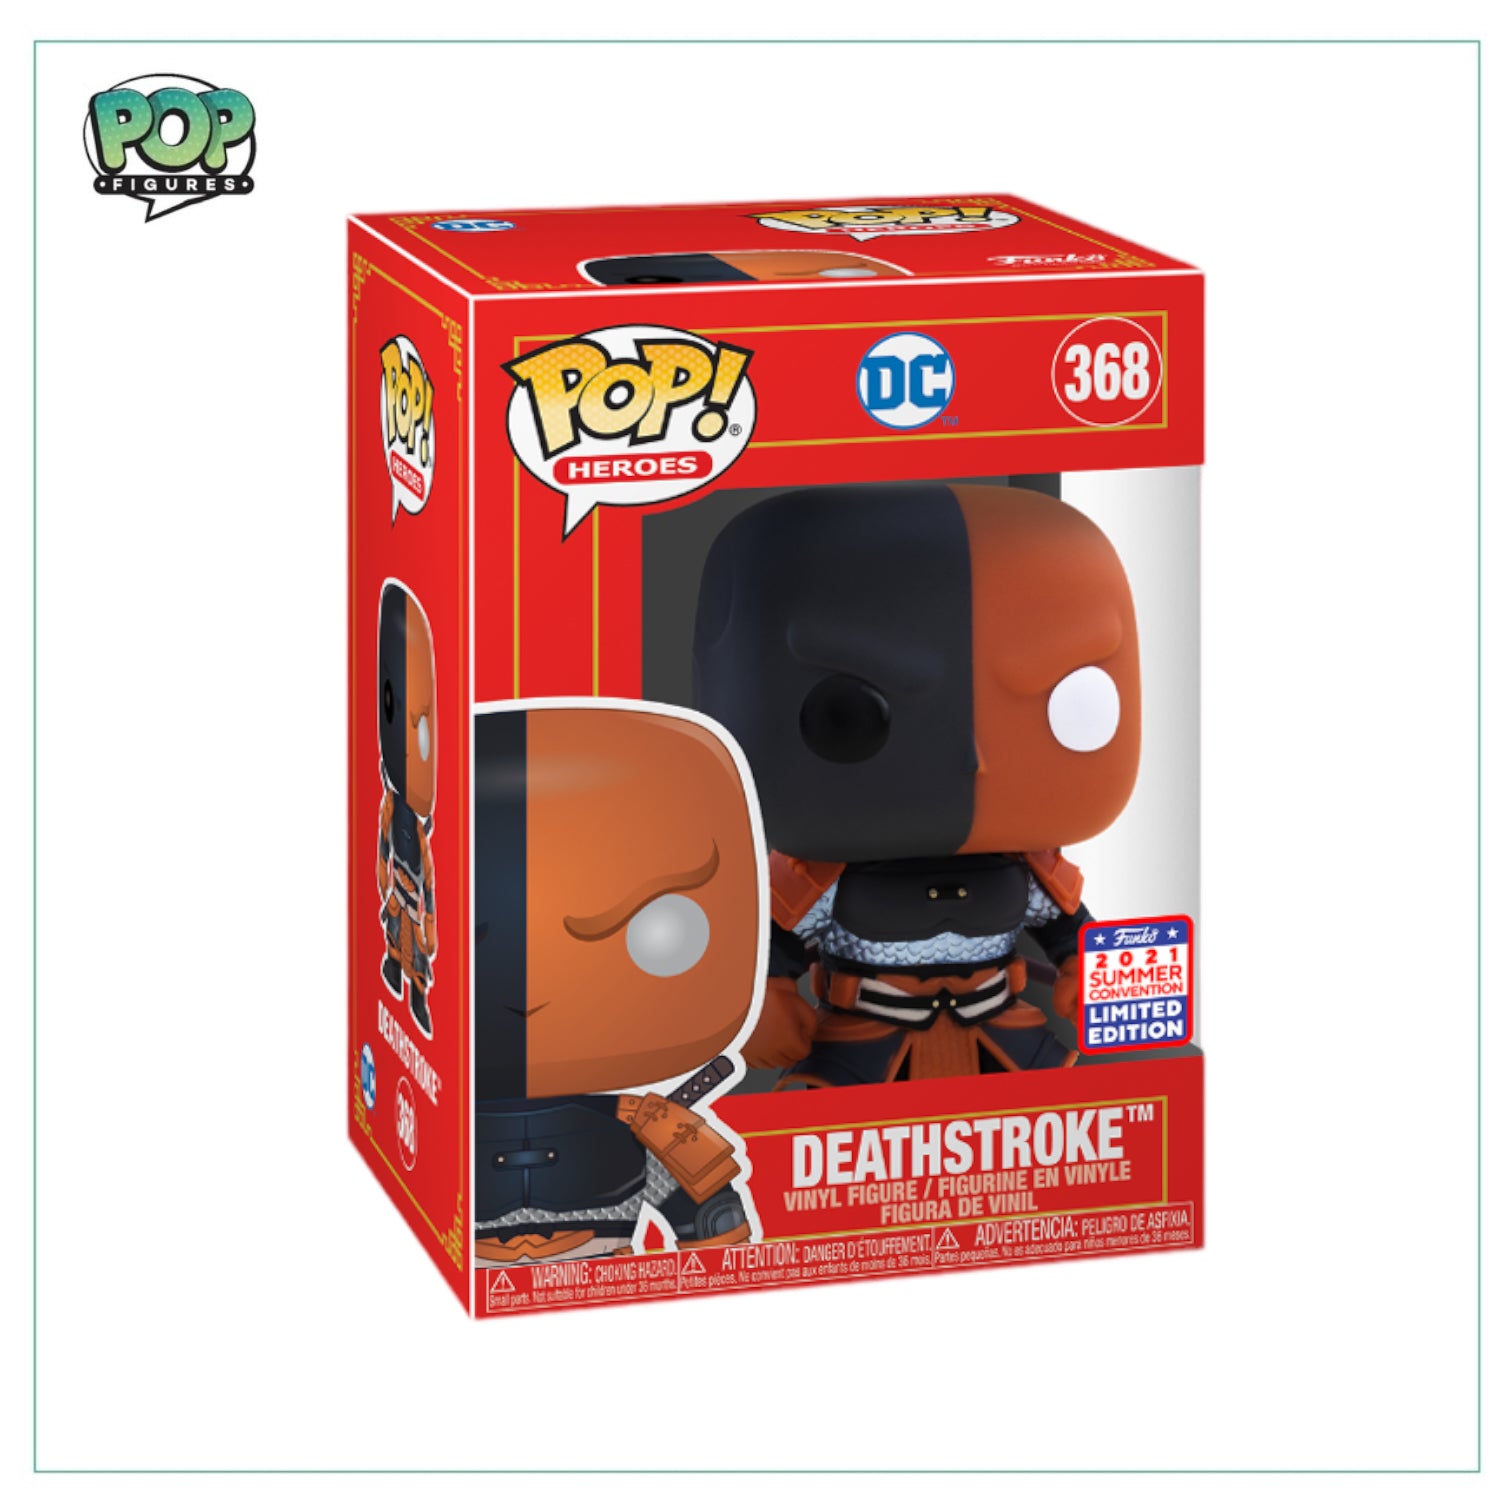 Deathstroke #368 Funko Pop! - DC Imperial Palace - Virtual Funkon 2021 Shared Exclusive